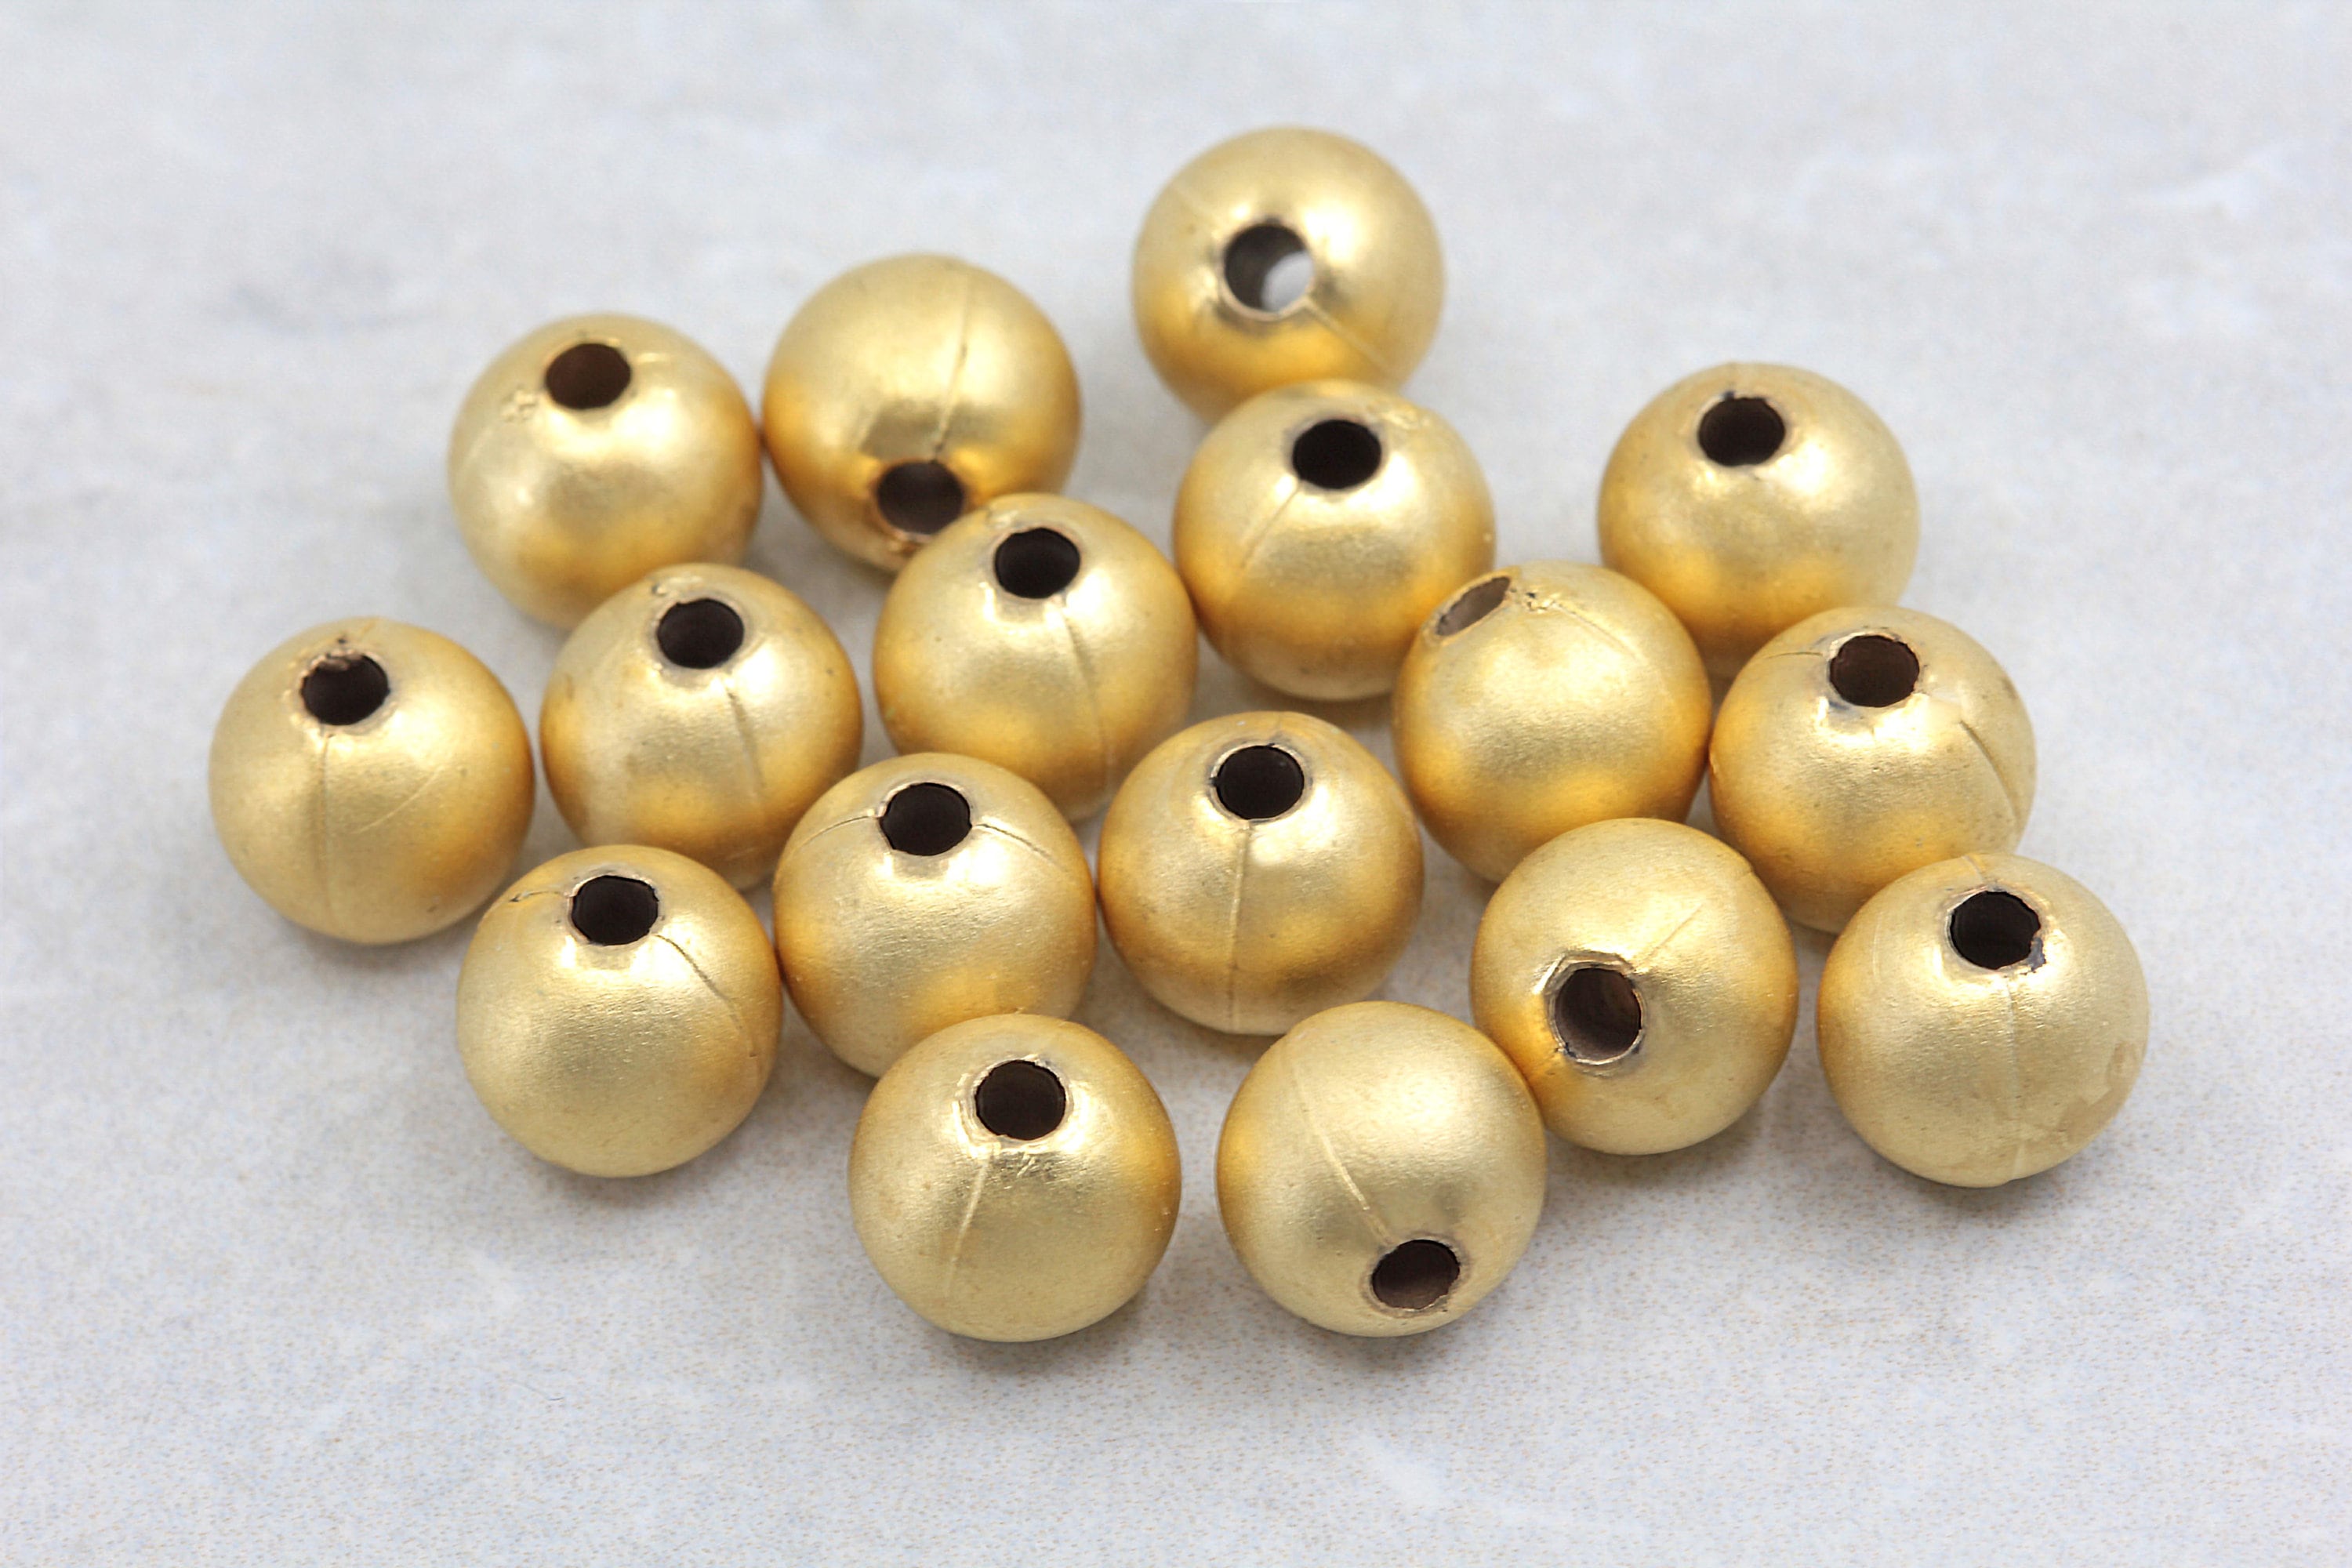 2160 Pieces Gold Spacer Beads Set, Assorted Bracelet Beads Round